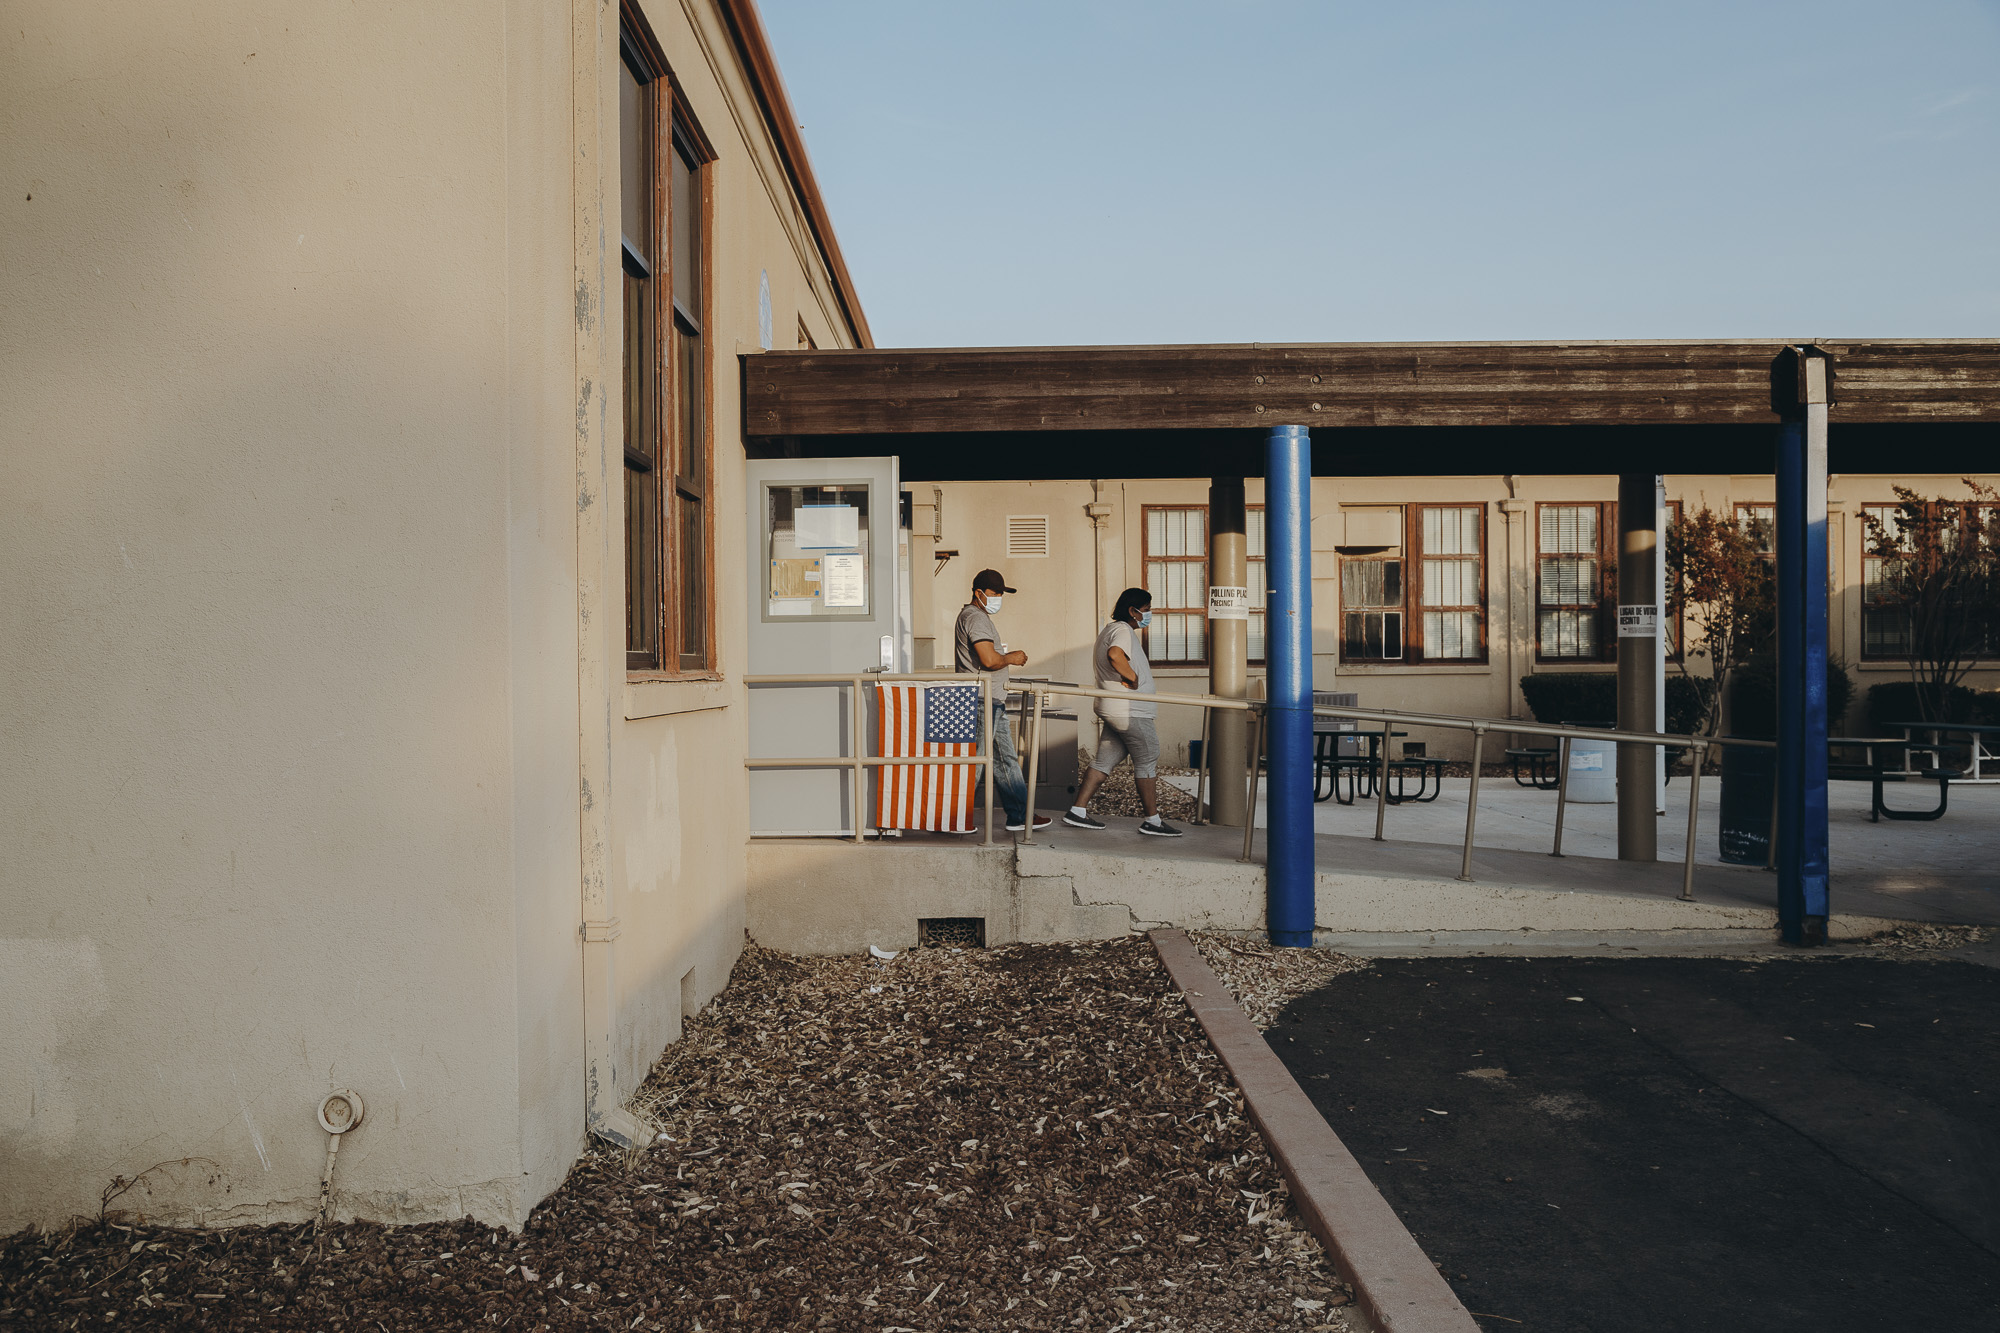 Voters exit Avenal High School in Kings County on November 3, 2020. Photo by Clara Mokri for CalMatters